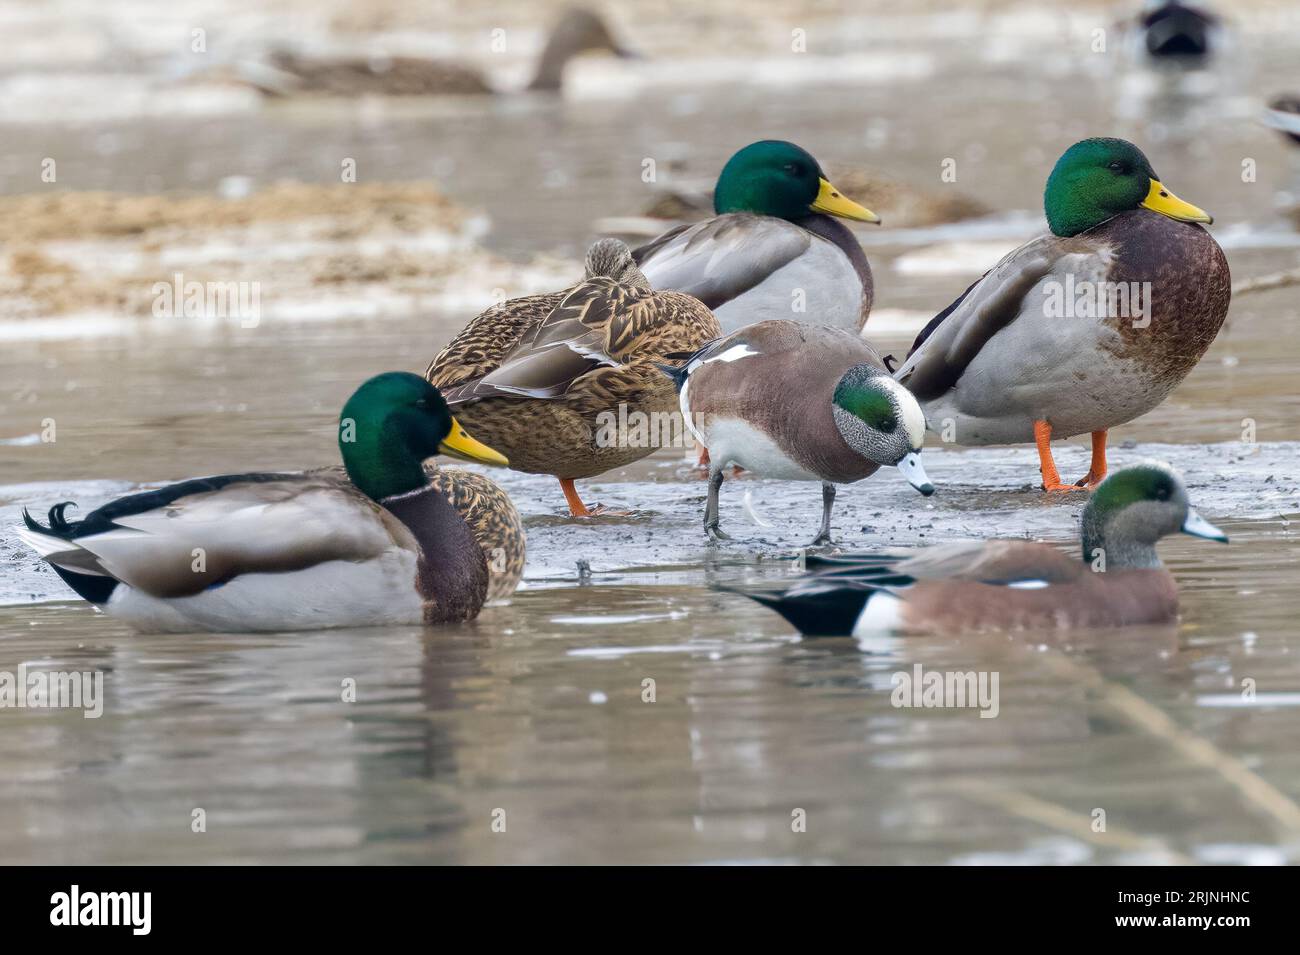 A flock of ducks wading in the shallow water of a beach shoreline Stock Photo